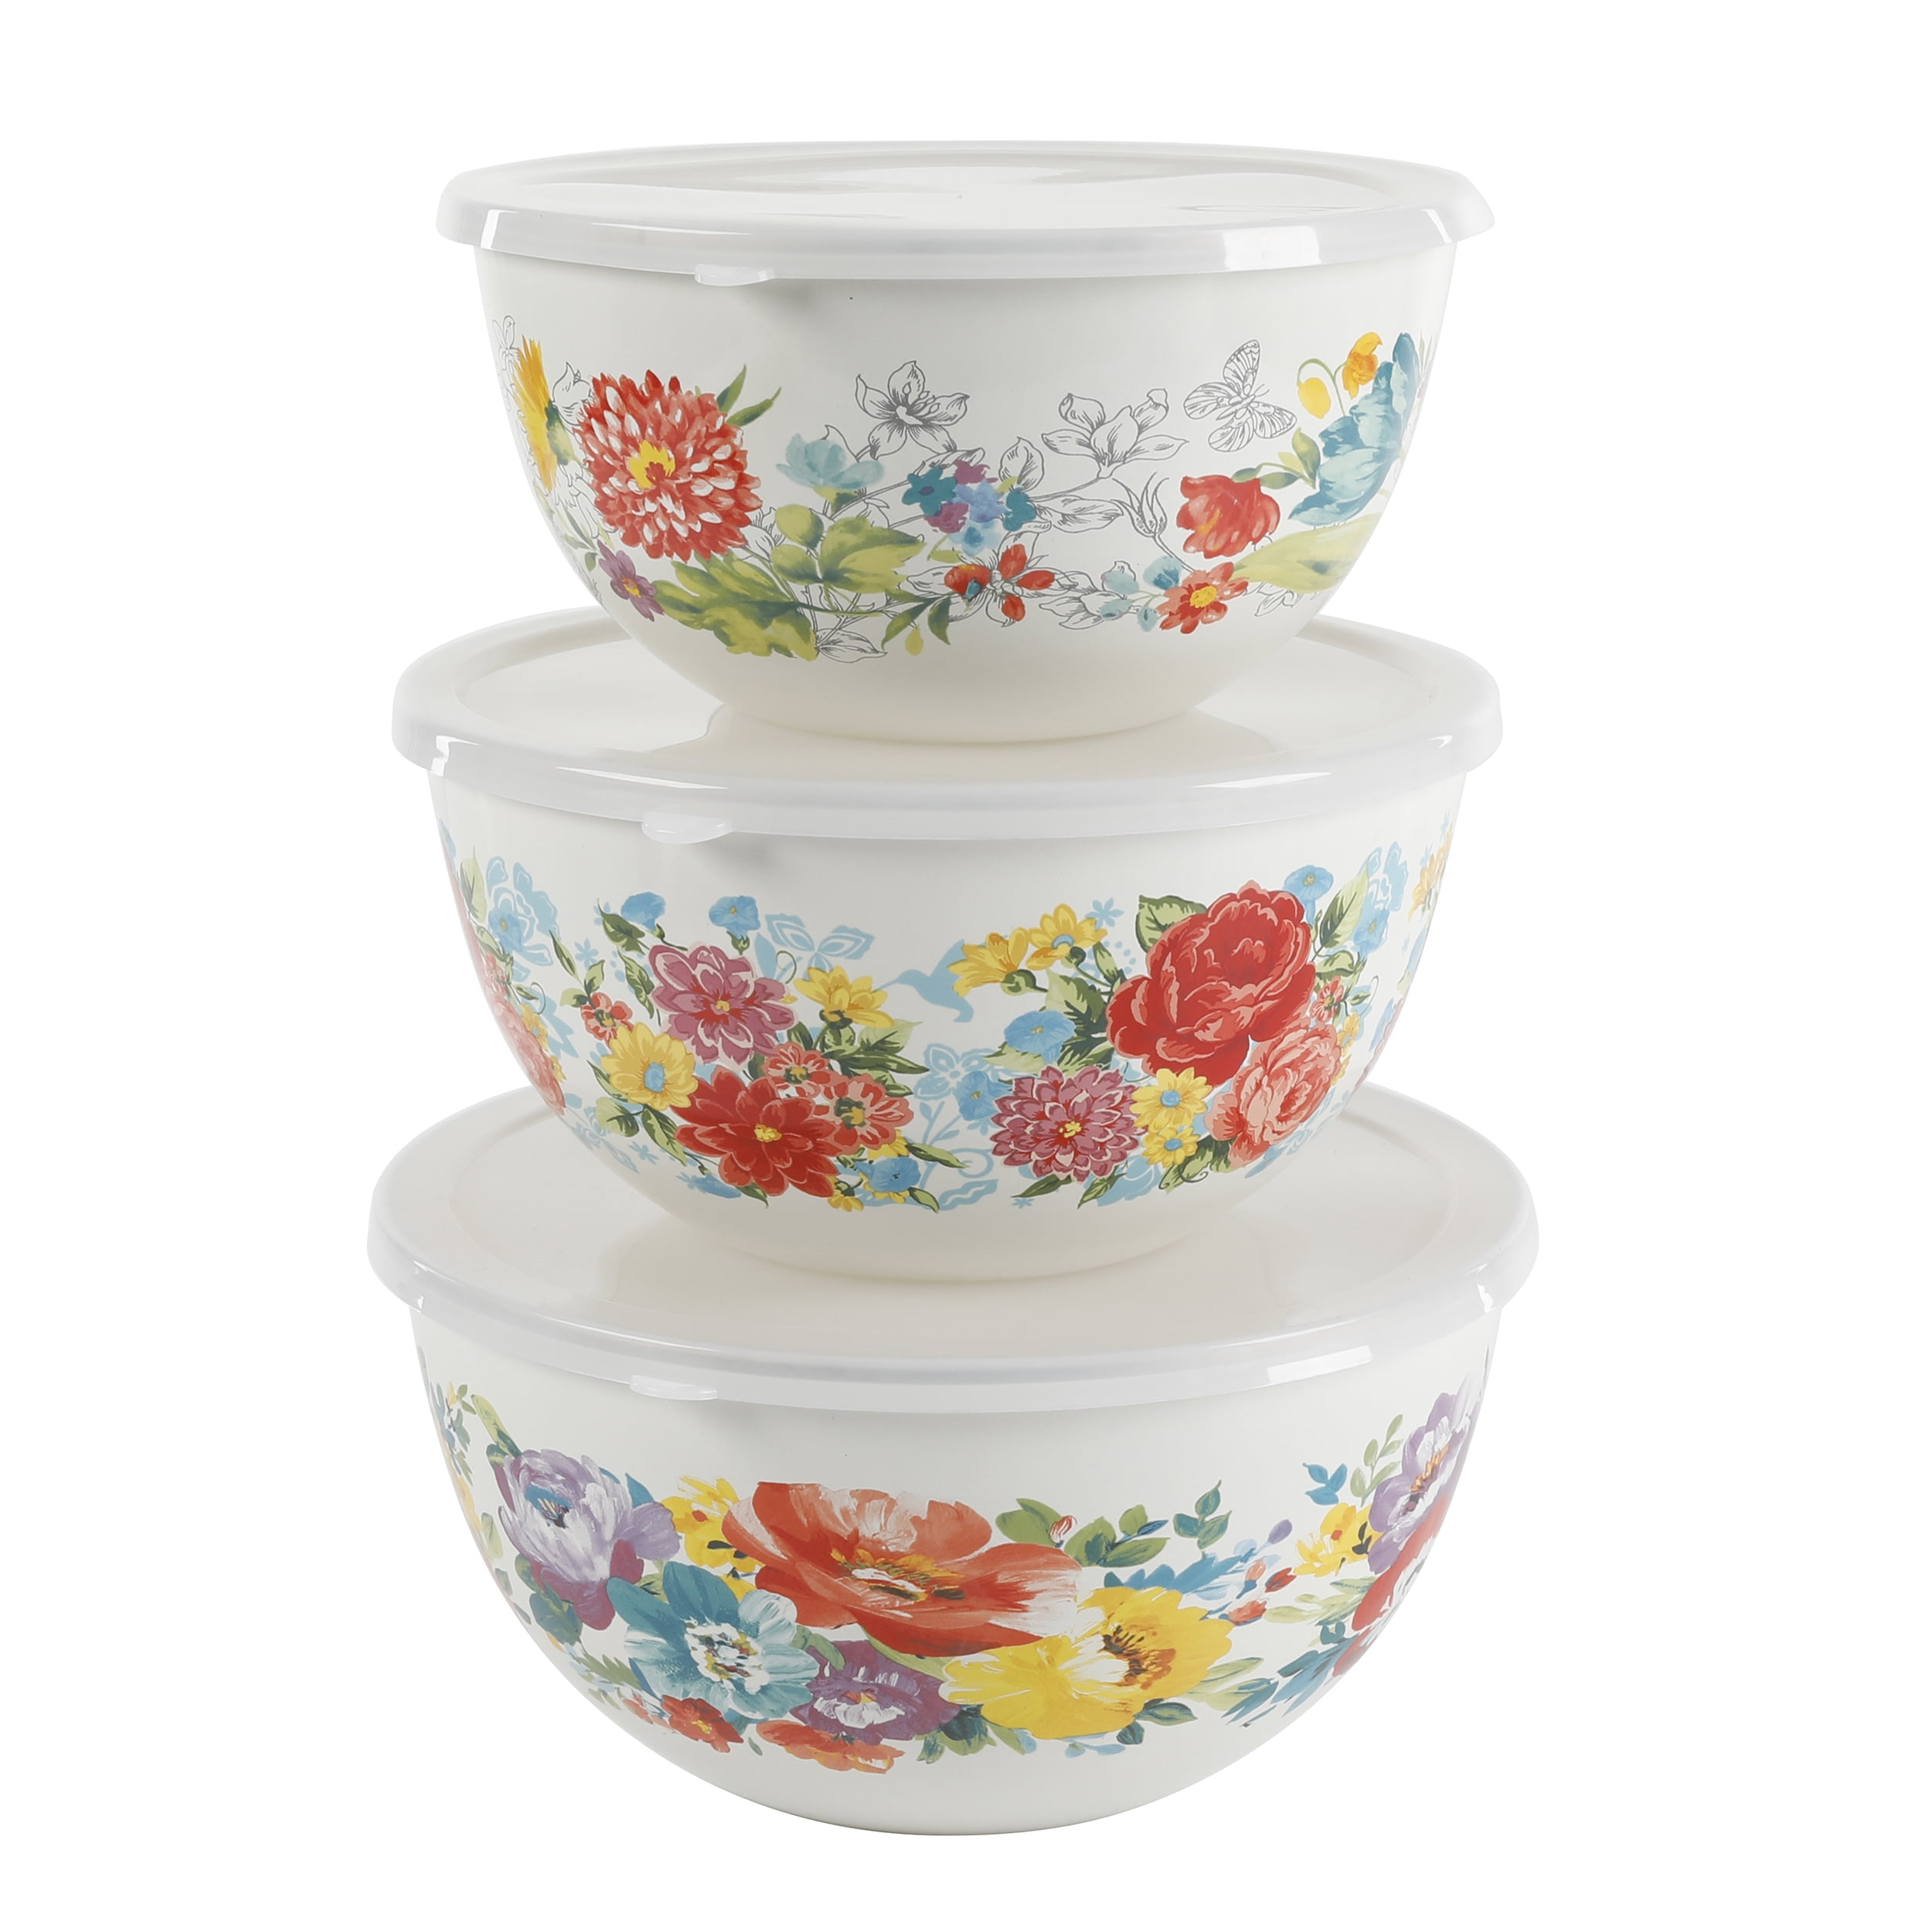 Details about   The Pioneer Woman Traveling Vines Melamine Mixing Bowl Set 10-Piece Set 